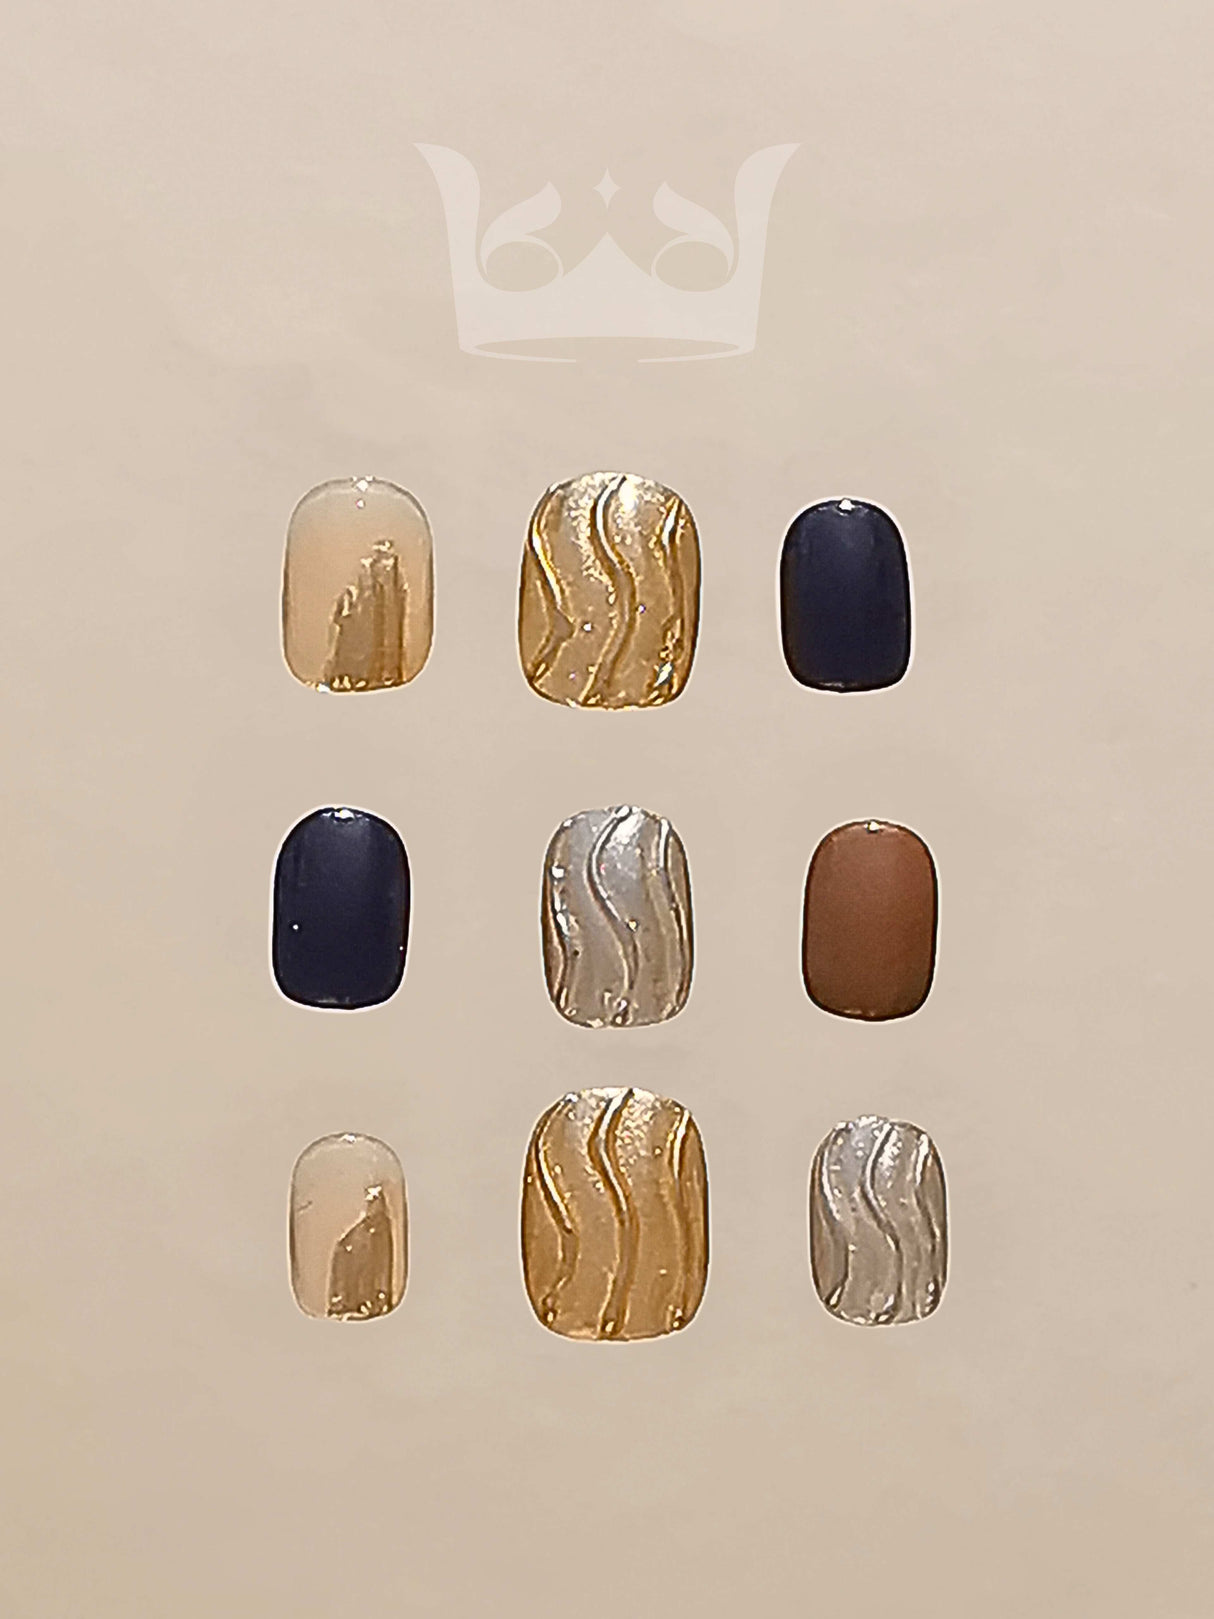 Stylish and modern nails with solid colors and metallic patterns in gold, silver, navy blue, copper, and nude tones for a trendy and fancy appearance.